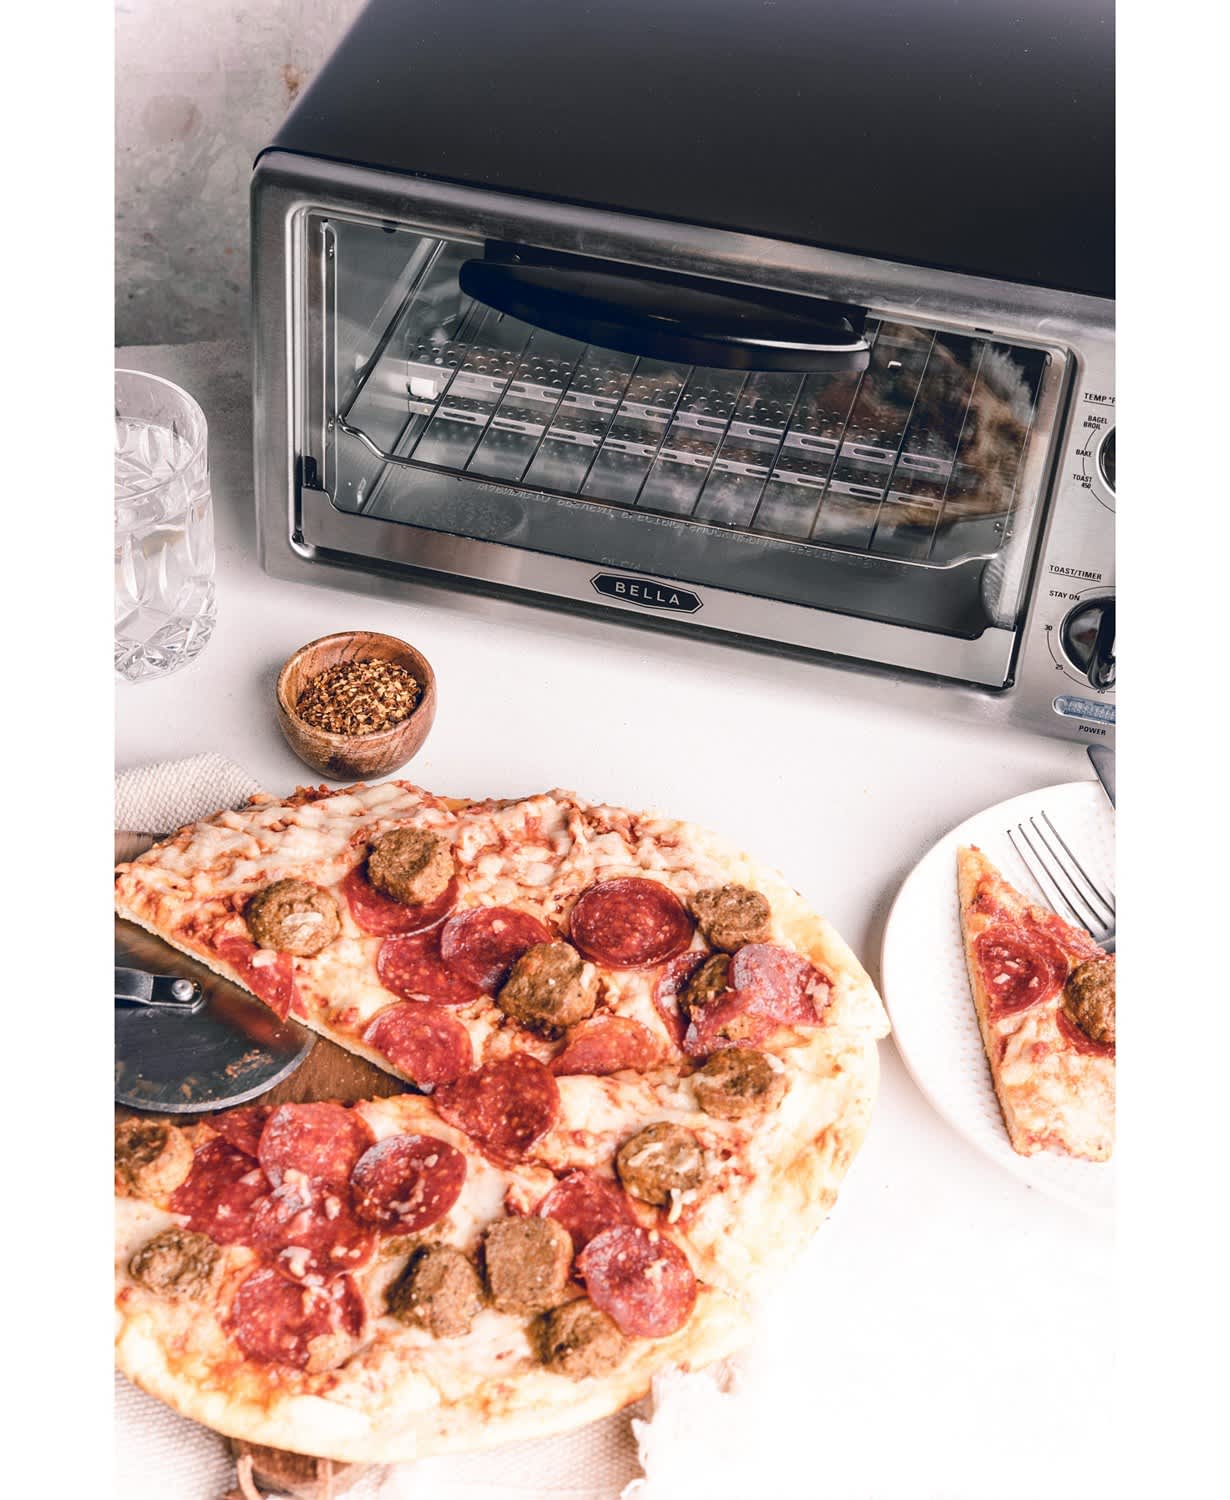 Hamilton Beach 31156 2-in-1 Countertop Oven and Long Slot Toaster - Best Toaster  Oven Under $100 